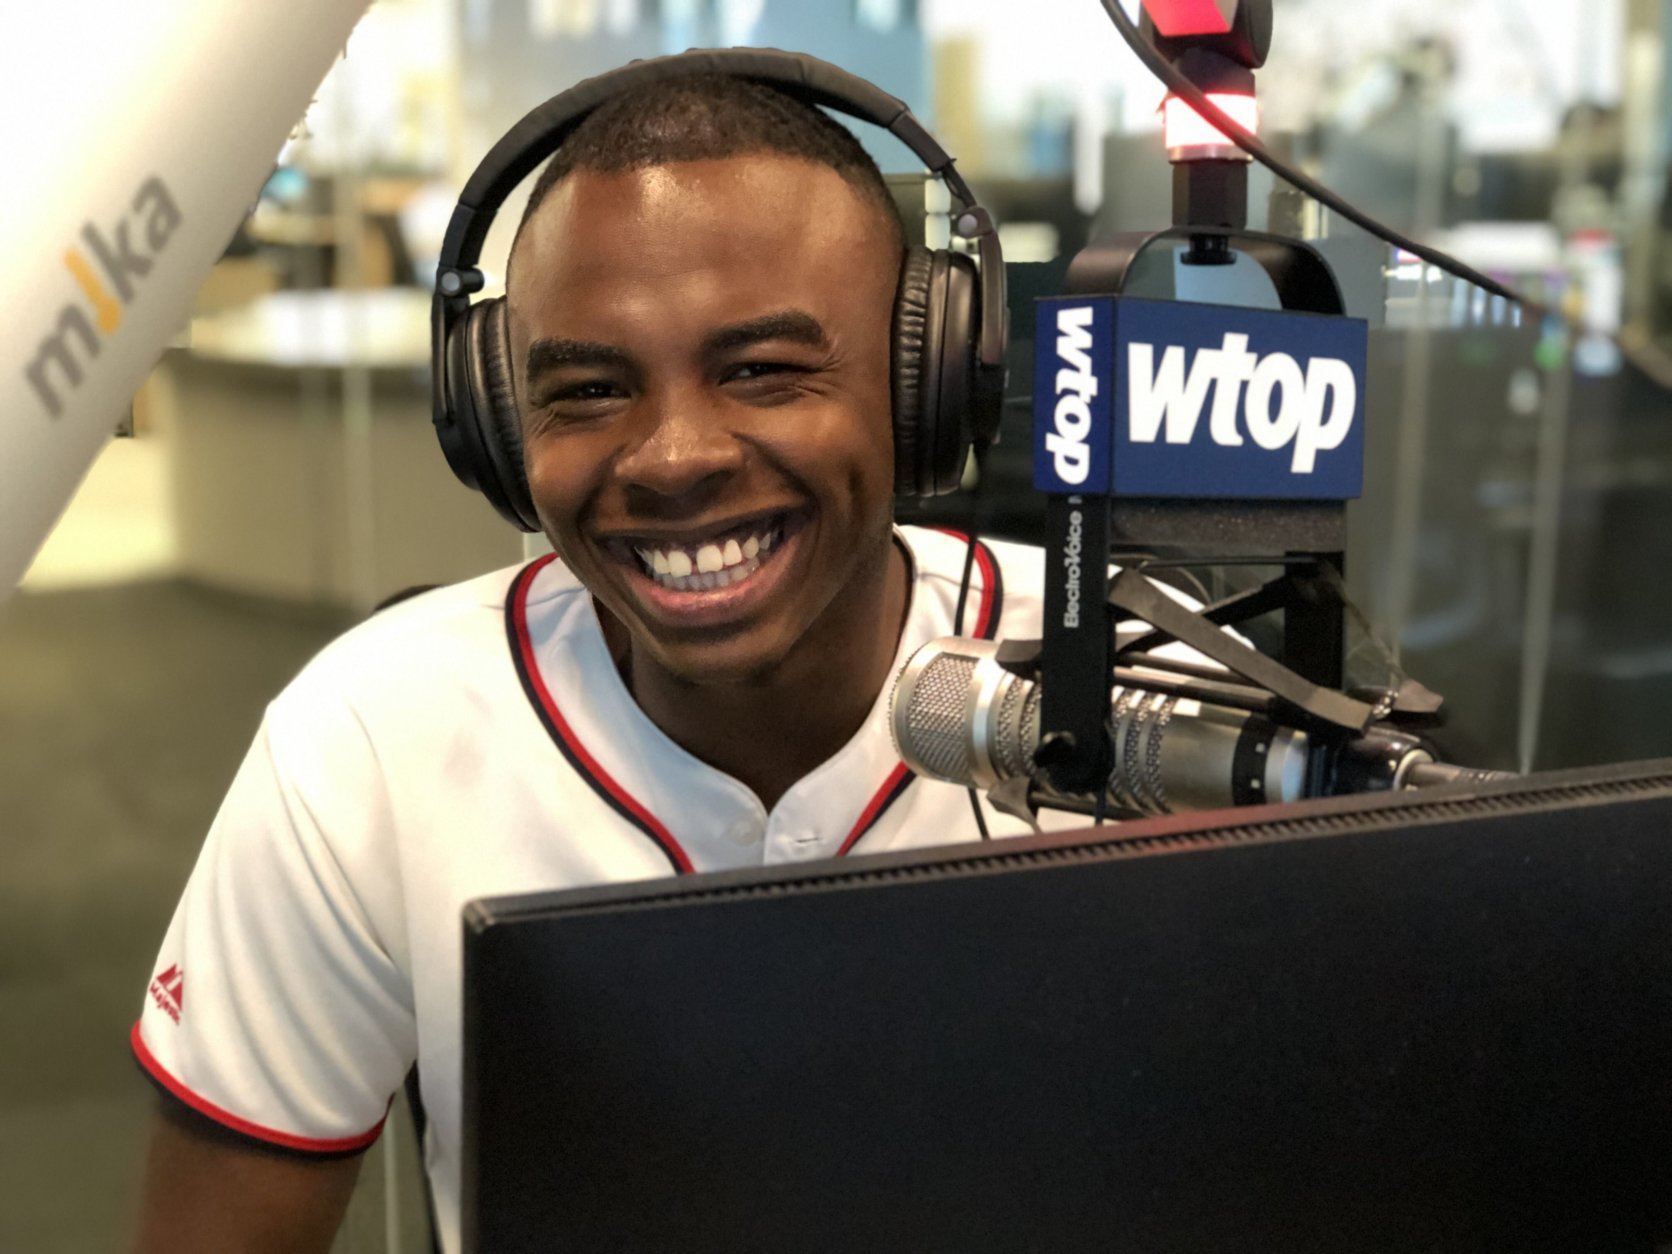 Quintin Paschall, DC native, Anacostia resident and “proud HBCU” graduate visited WTOP to talk about that moment during the Morehouse College commencement when the class of 2019 learned their student debt would be wiped out thanks to a grant from billionaire Robert F.Smith. (WTOP/Kate Ryan)